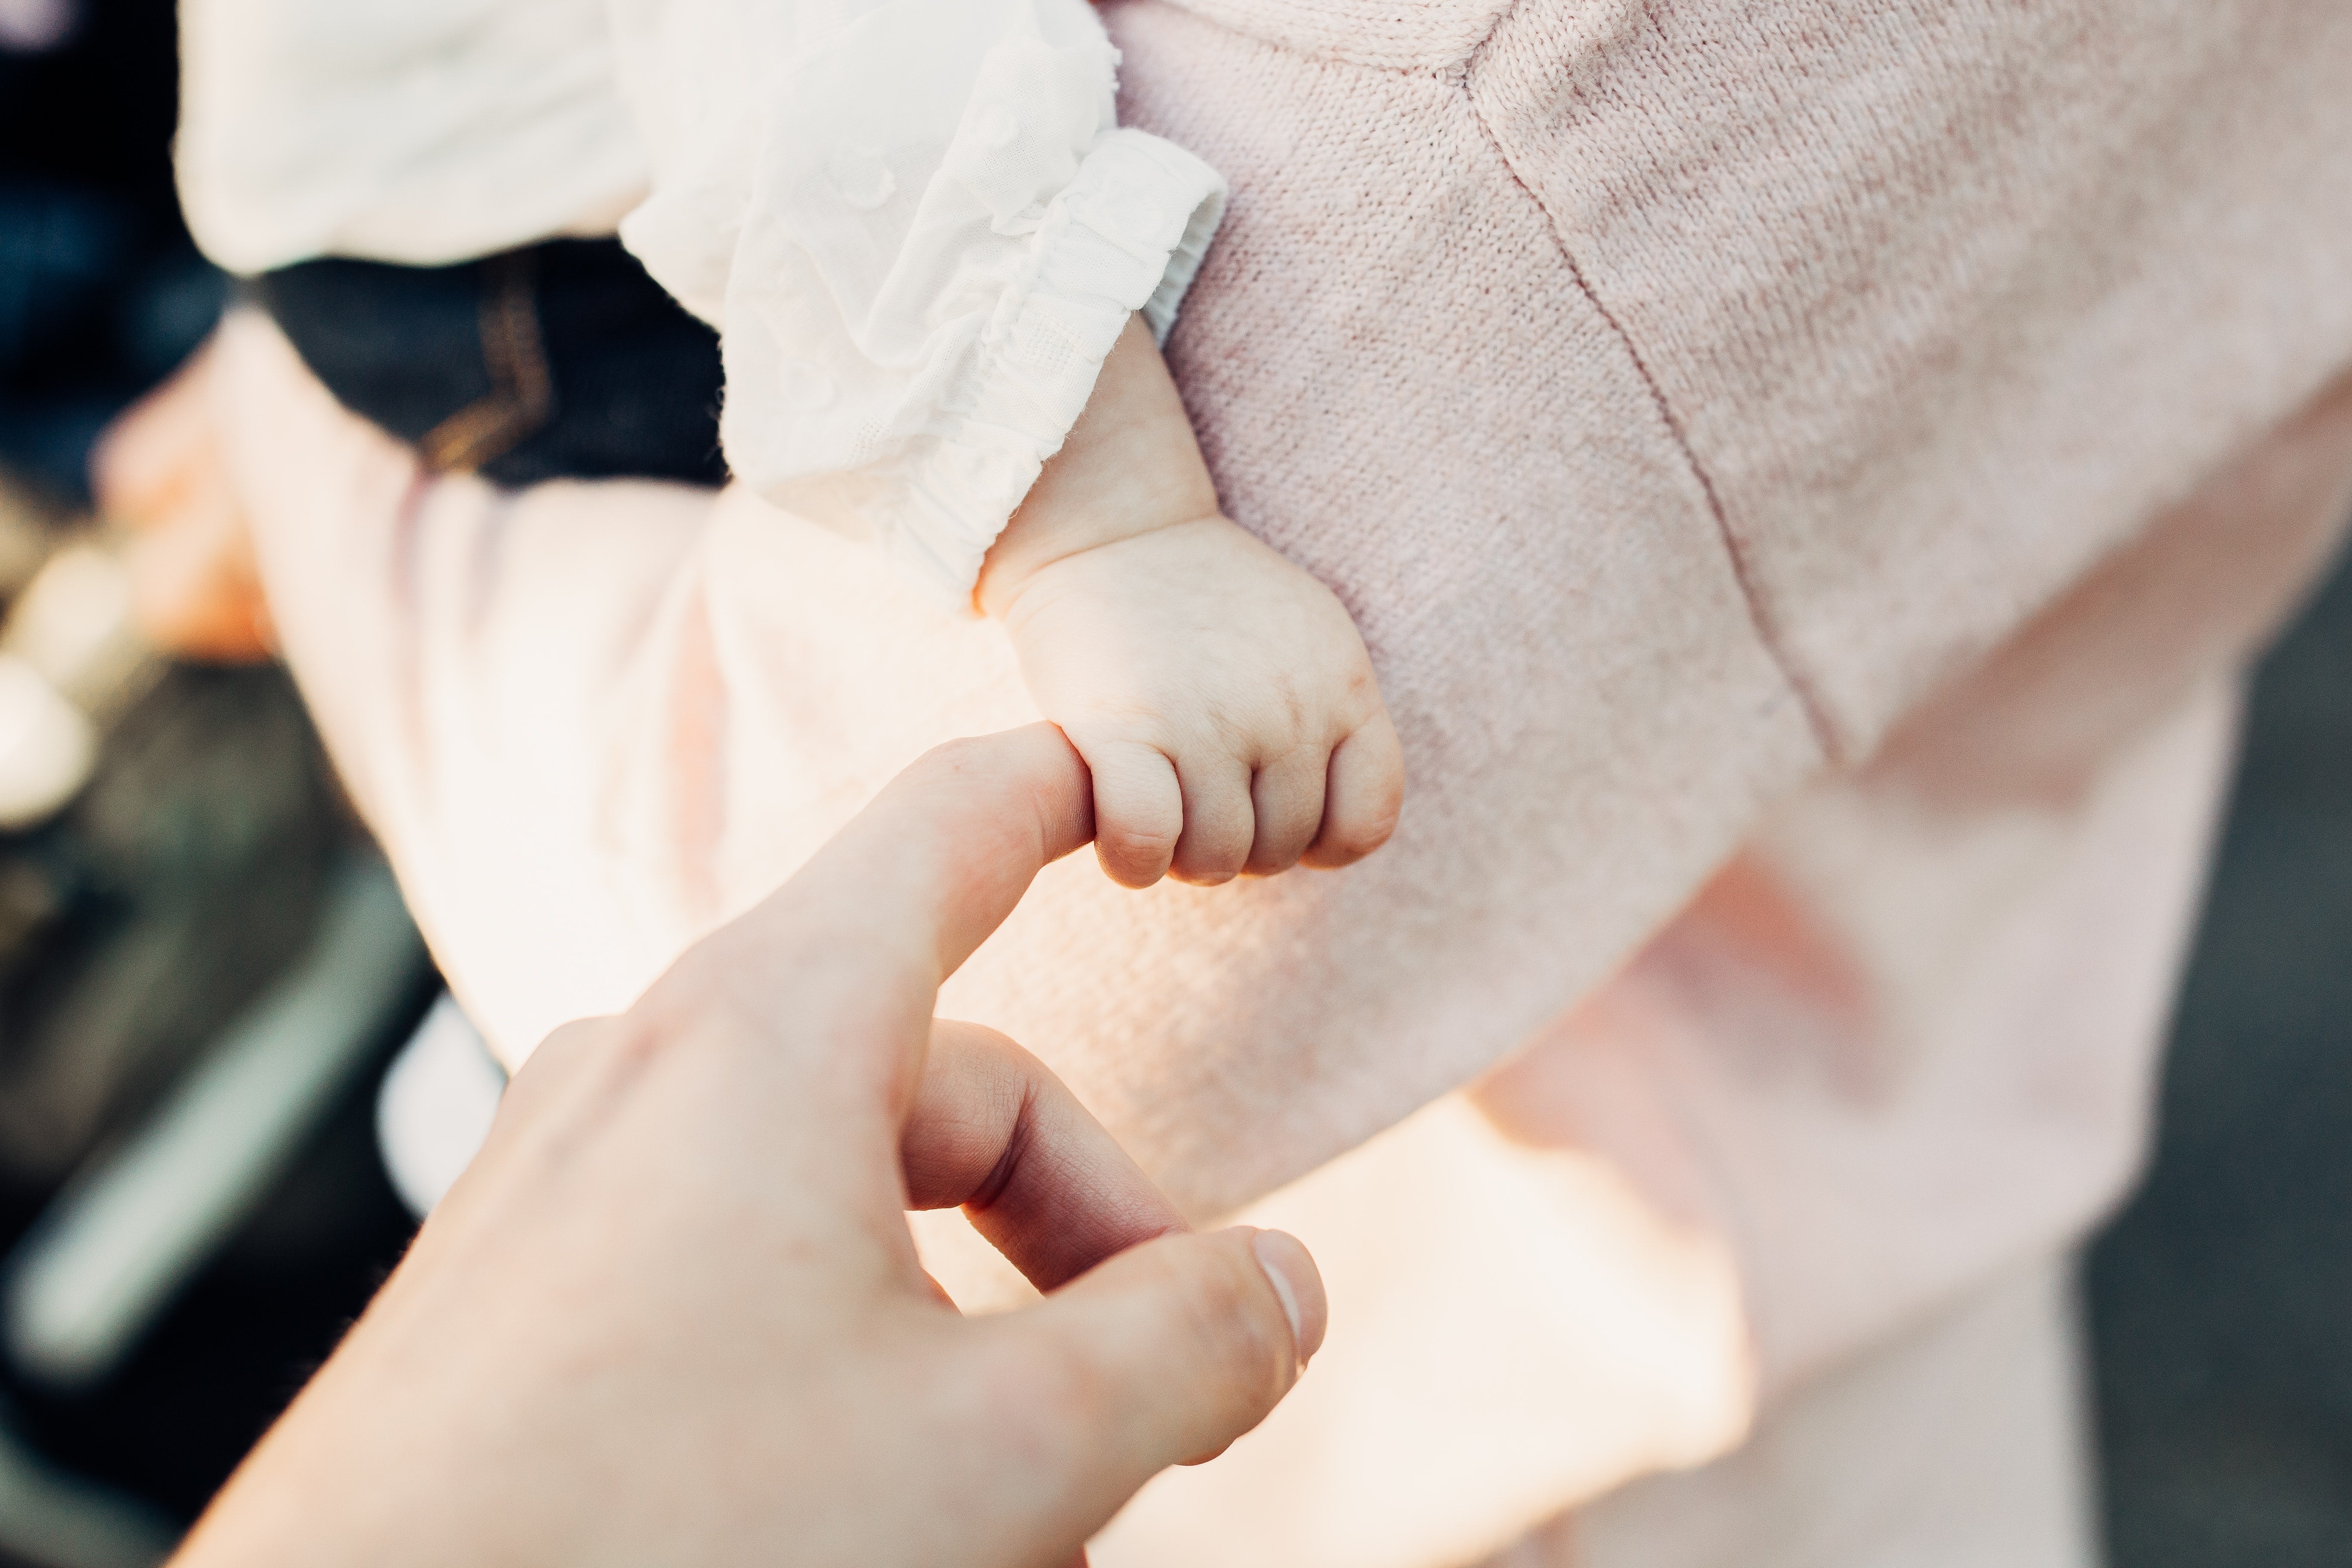 A baby's hand gently holding a grown-up's index finger.